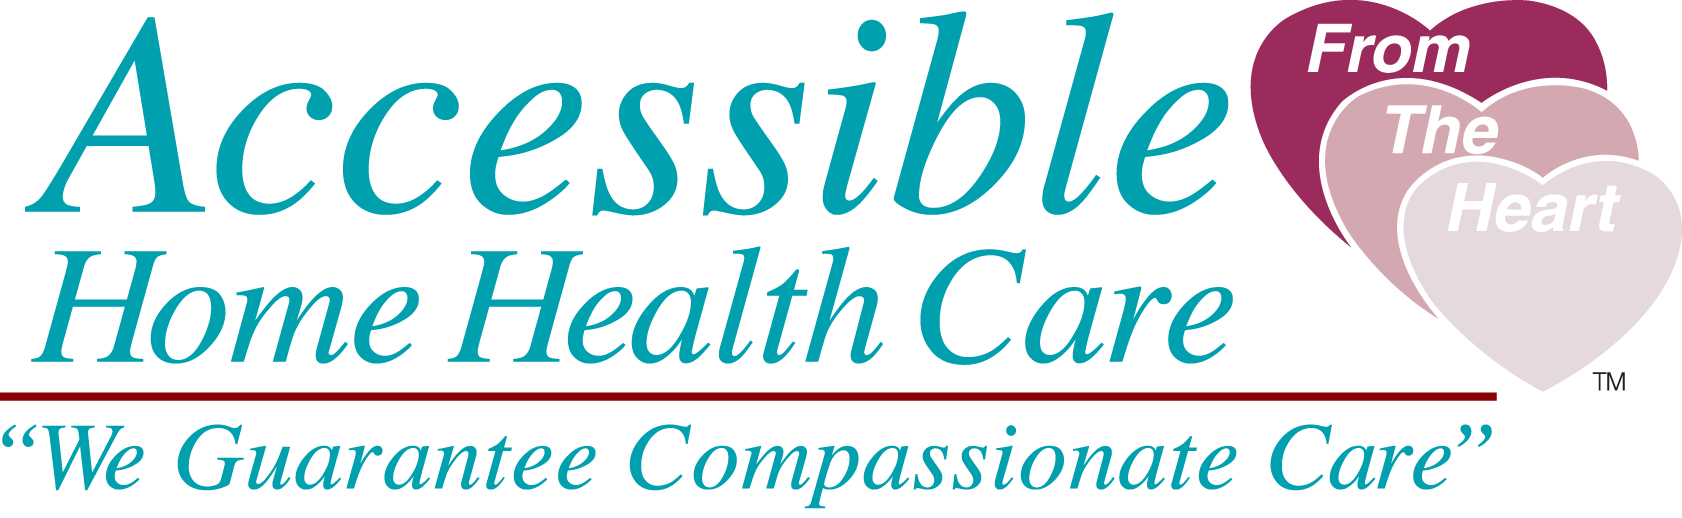 Accessible Home Health Care 